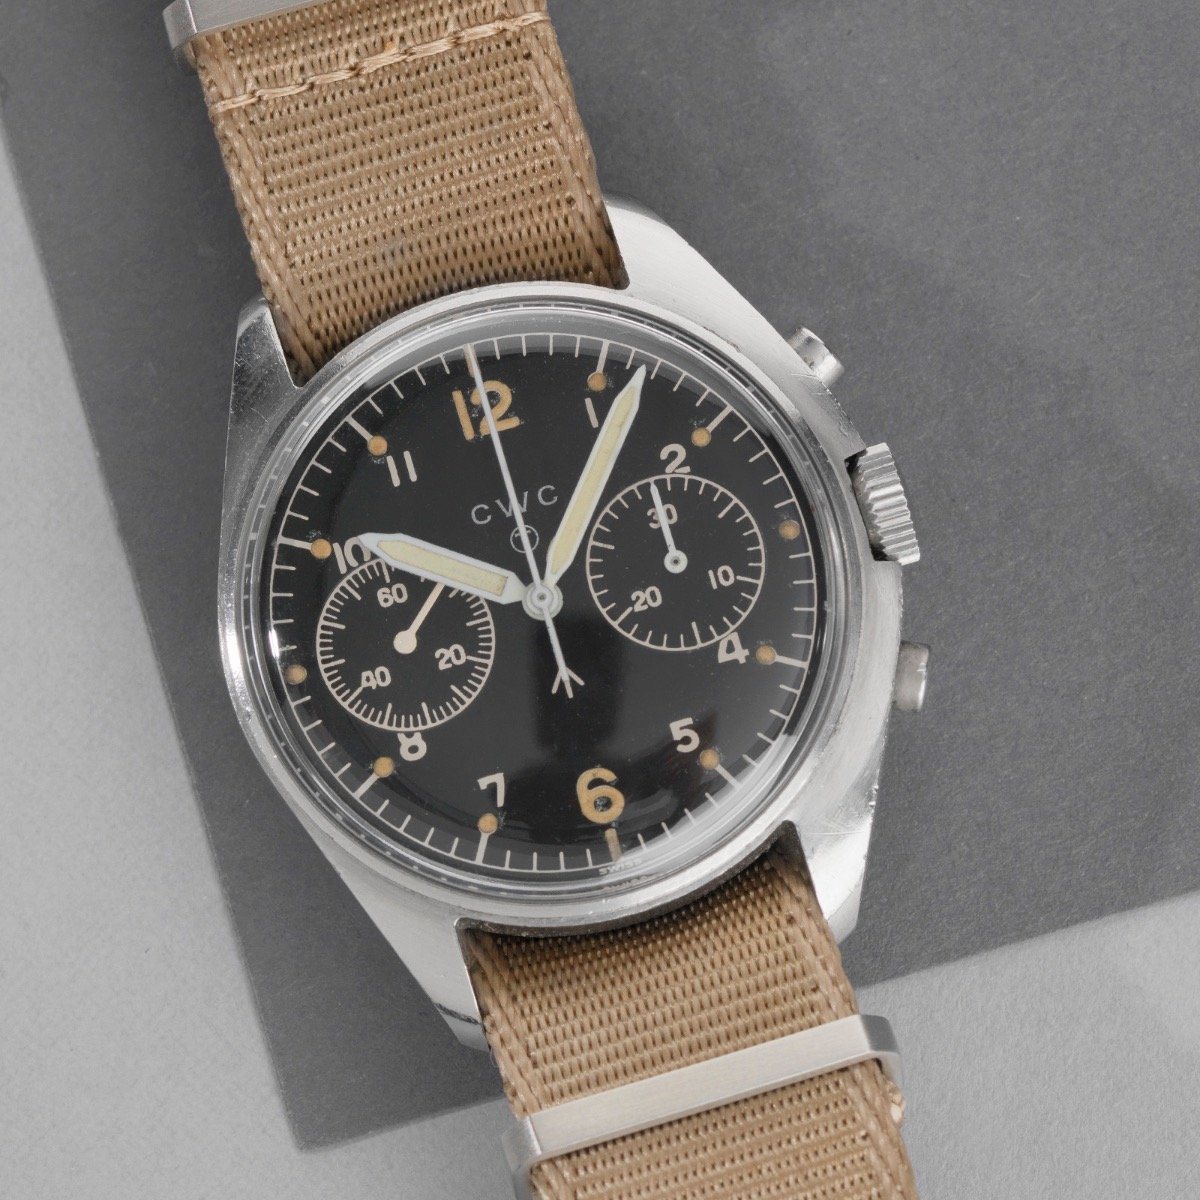 CWC Chronograph Issued to the British Royal Air Force